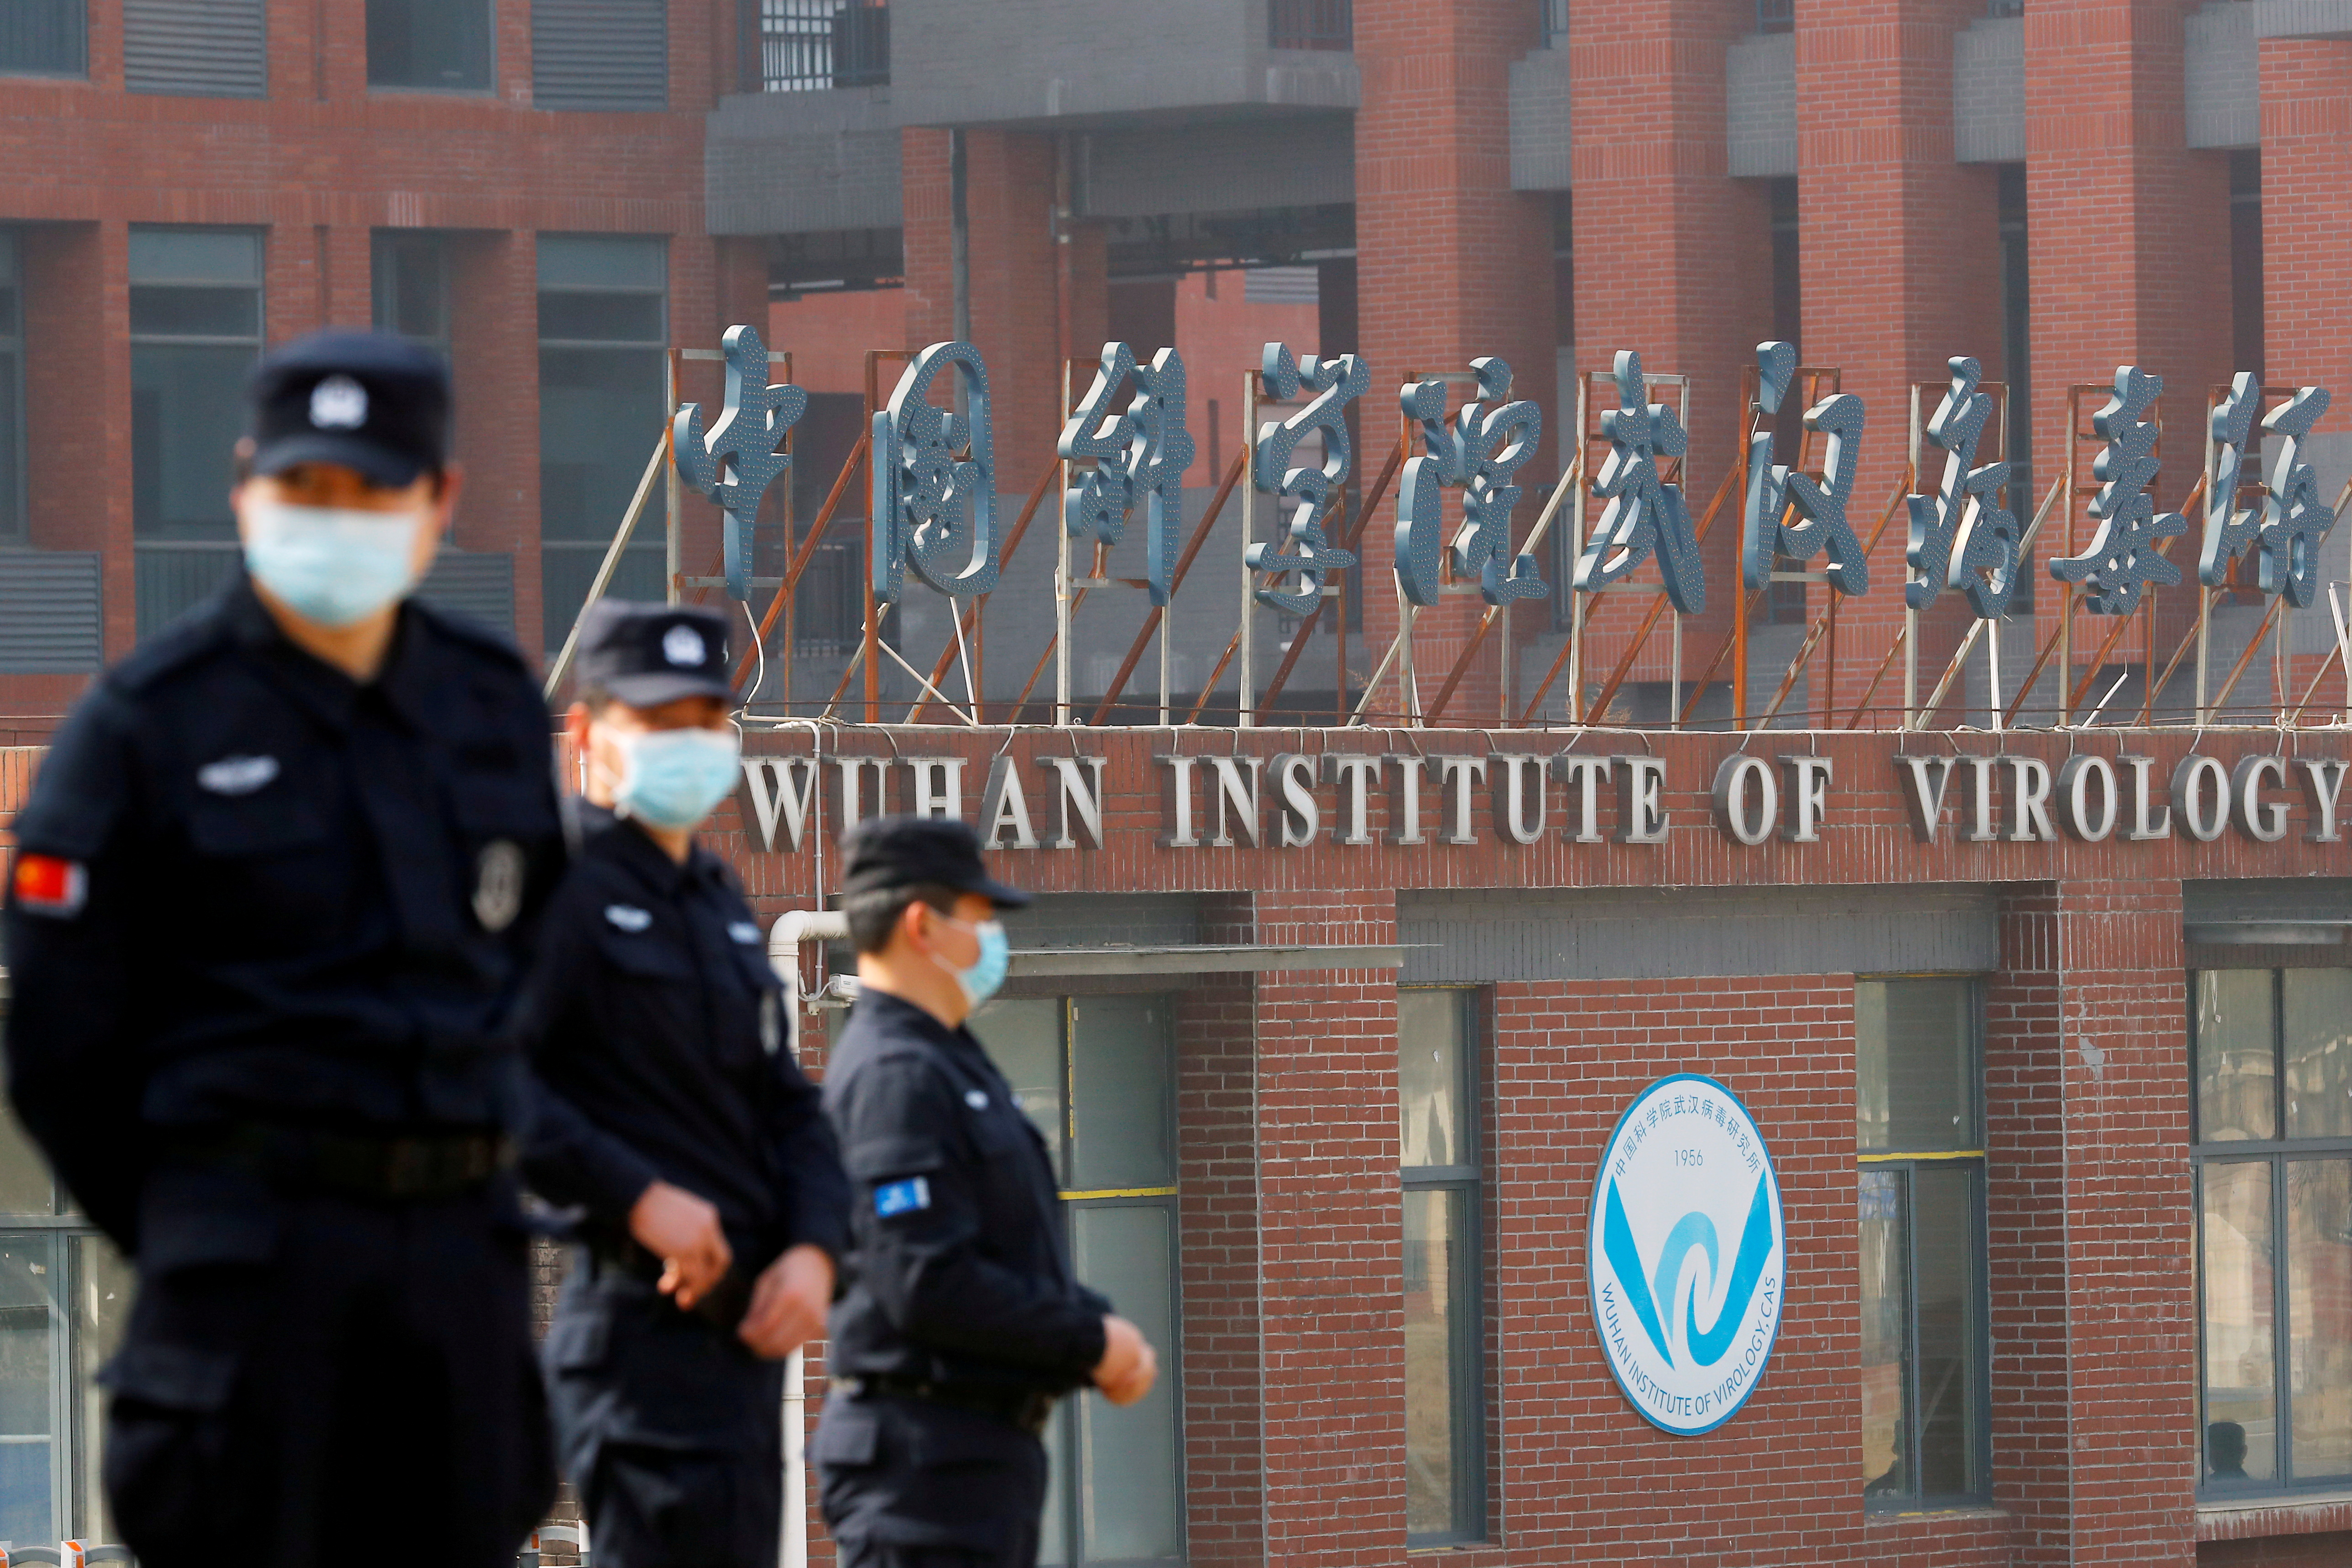 FILE PHOTO: Security personnel keep watch outside the Wuhan Institute of Virology during the visit by the World Health Organization (WHO) team tasked with investigating the origins of the coronavirus disease (COVID-19), in Wuhan, Hubei province, China February 3, 2021. REUTERS/Thomas Peter/File Photo